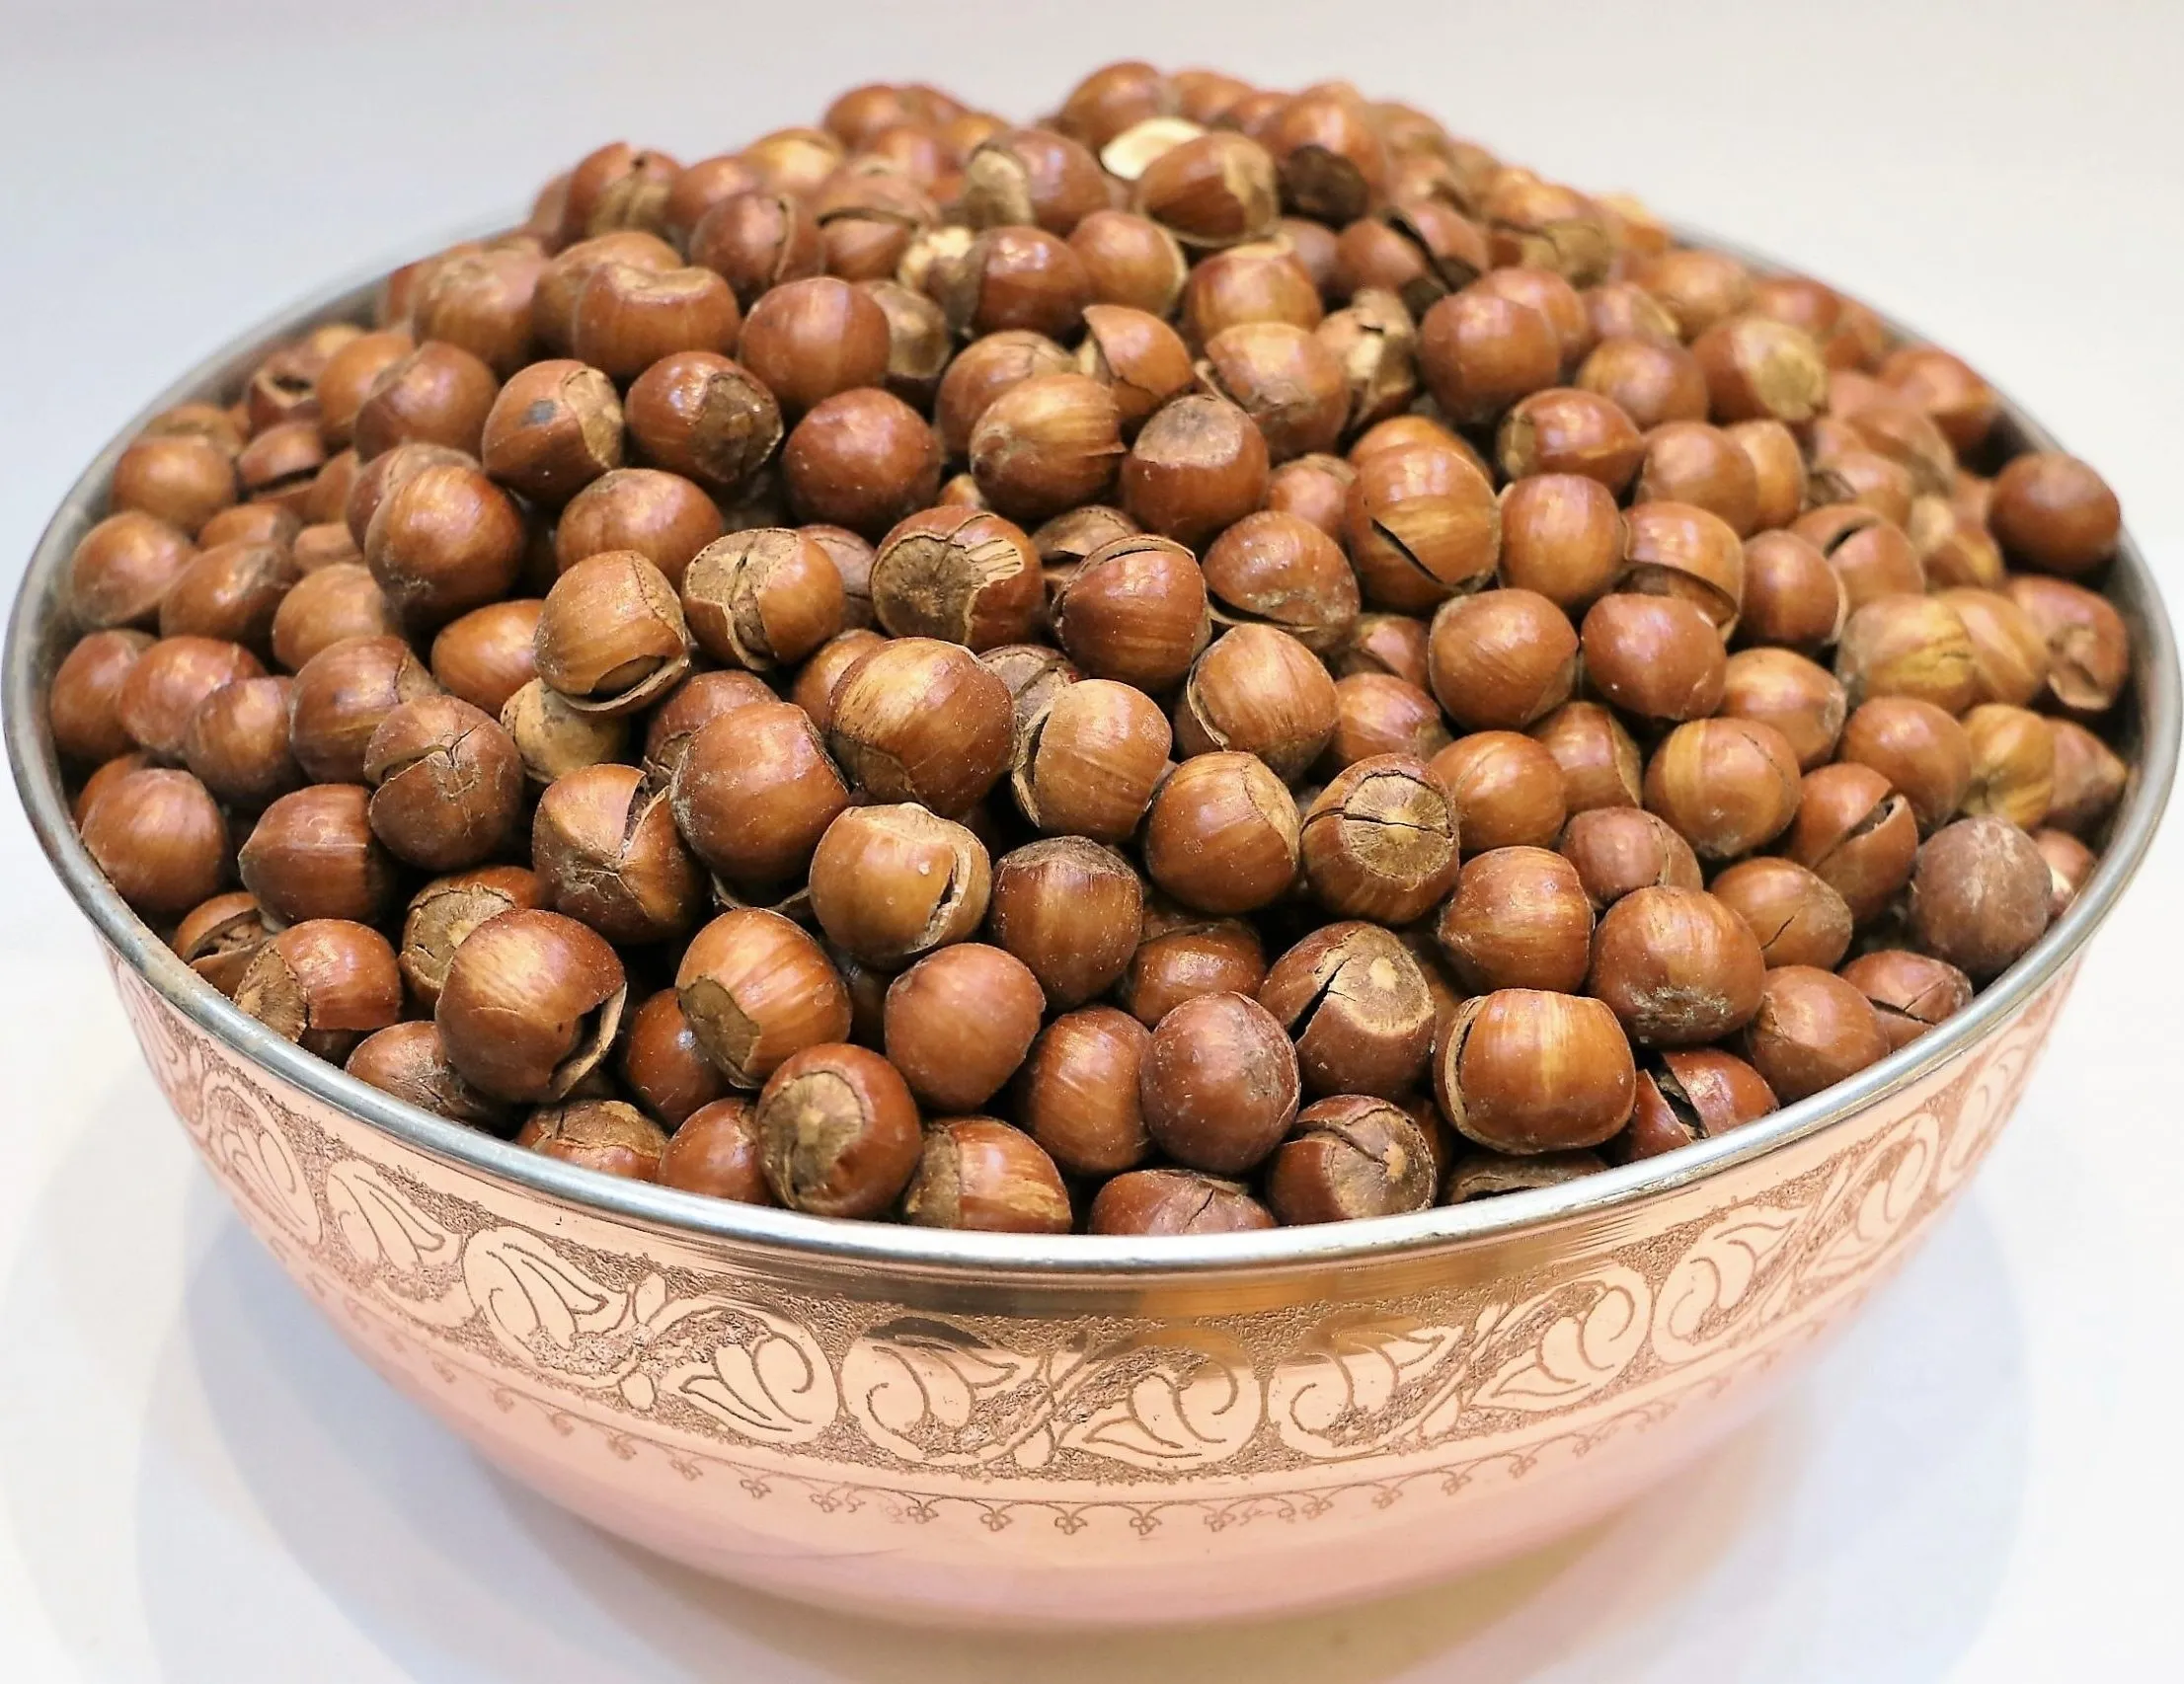 Purchase and today price of bulk hazelnuts in shell